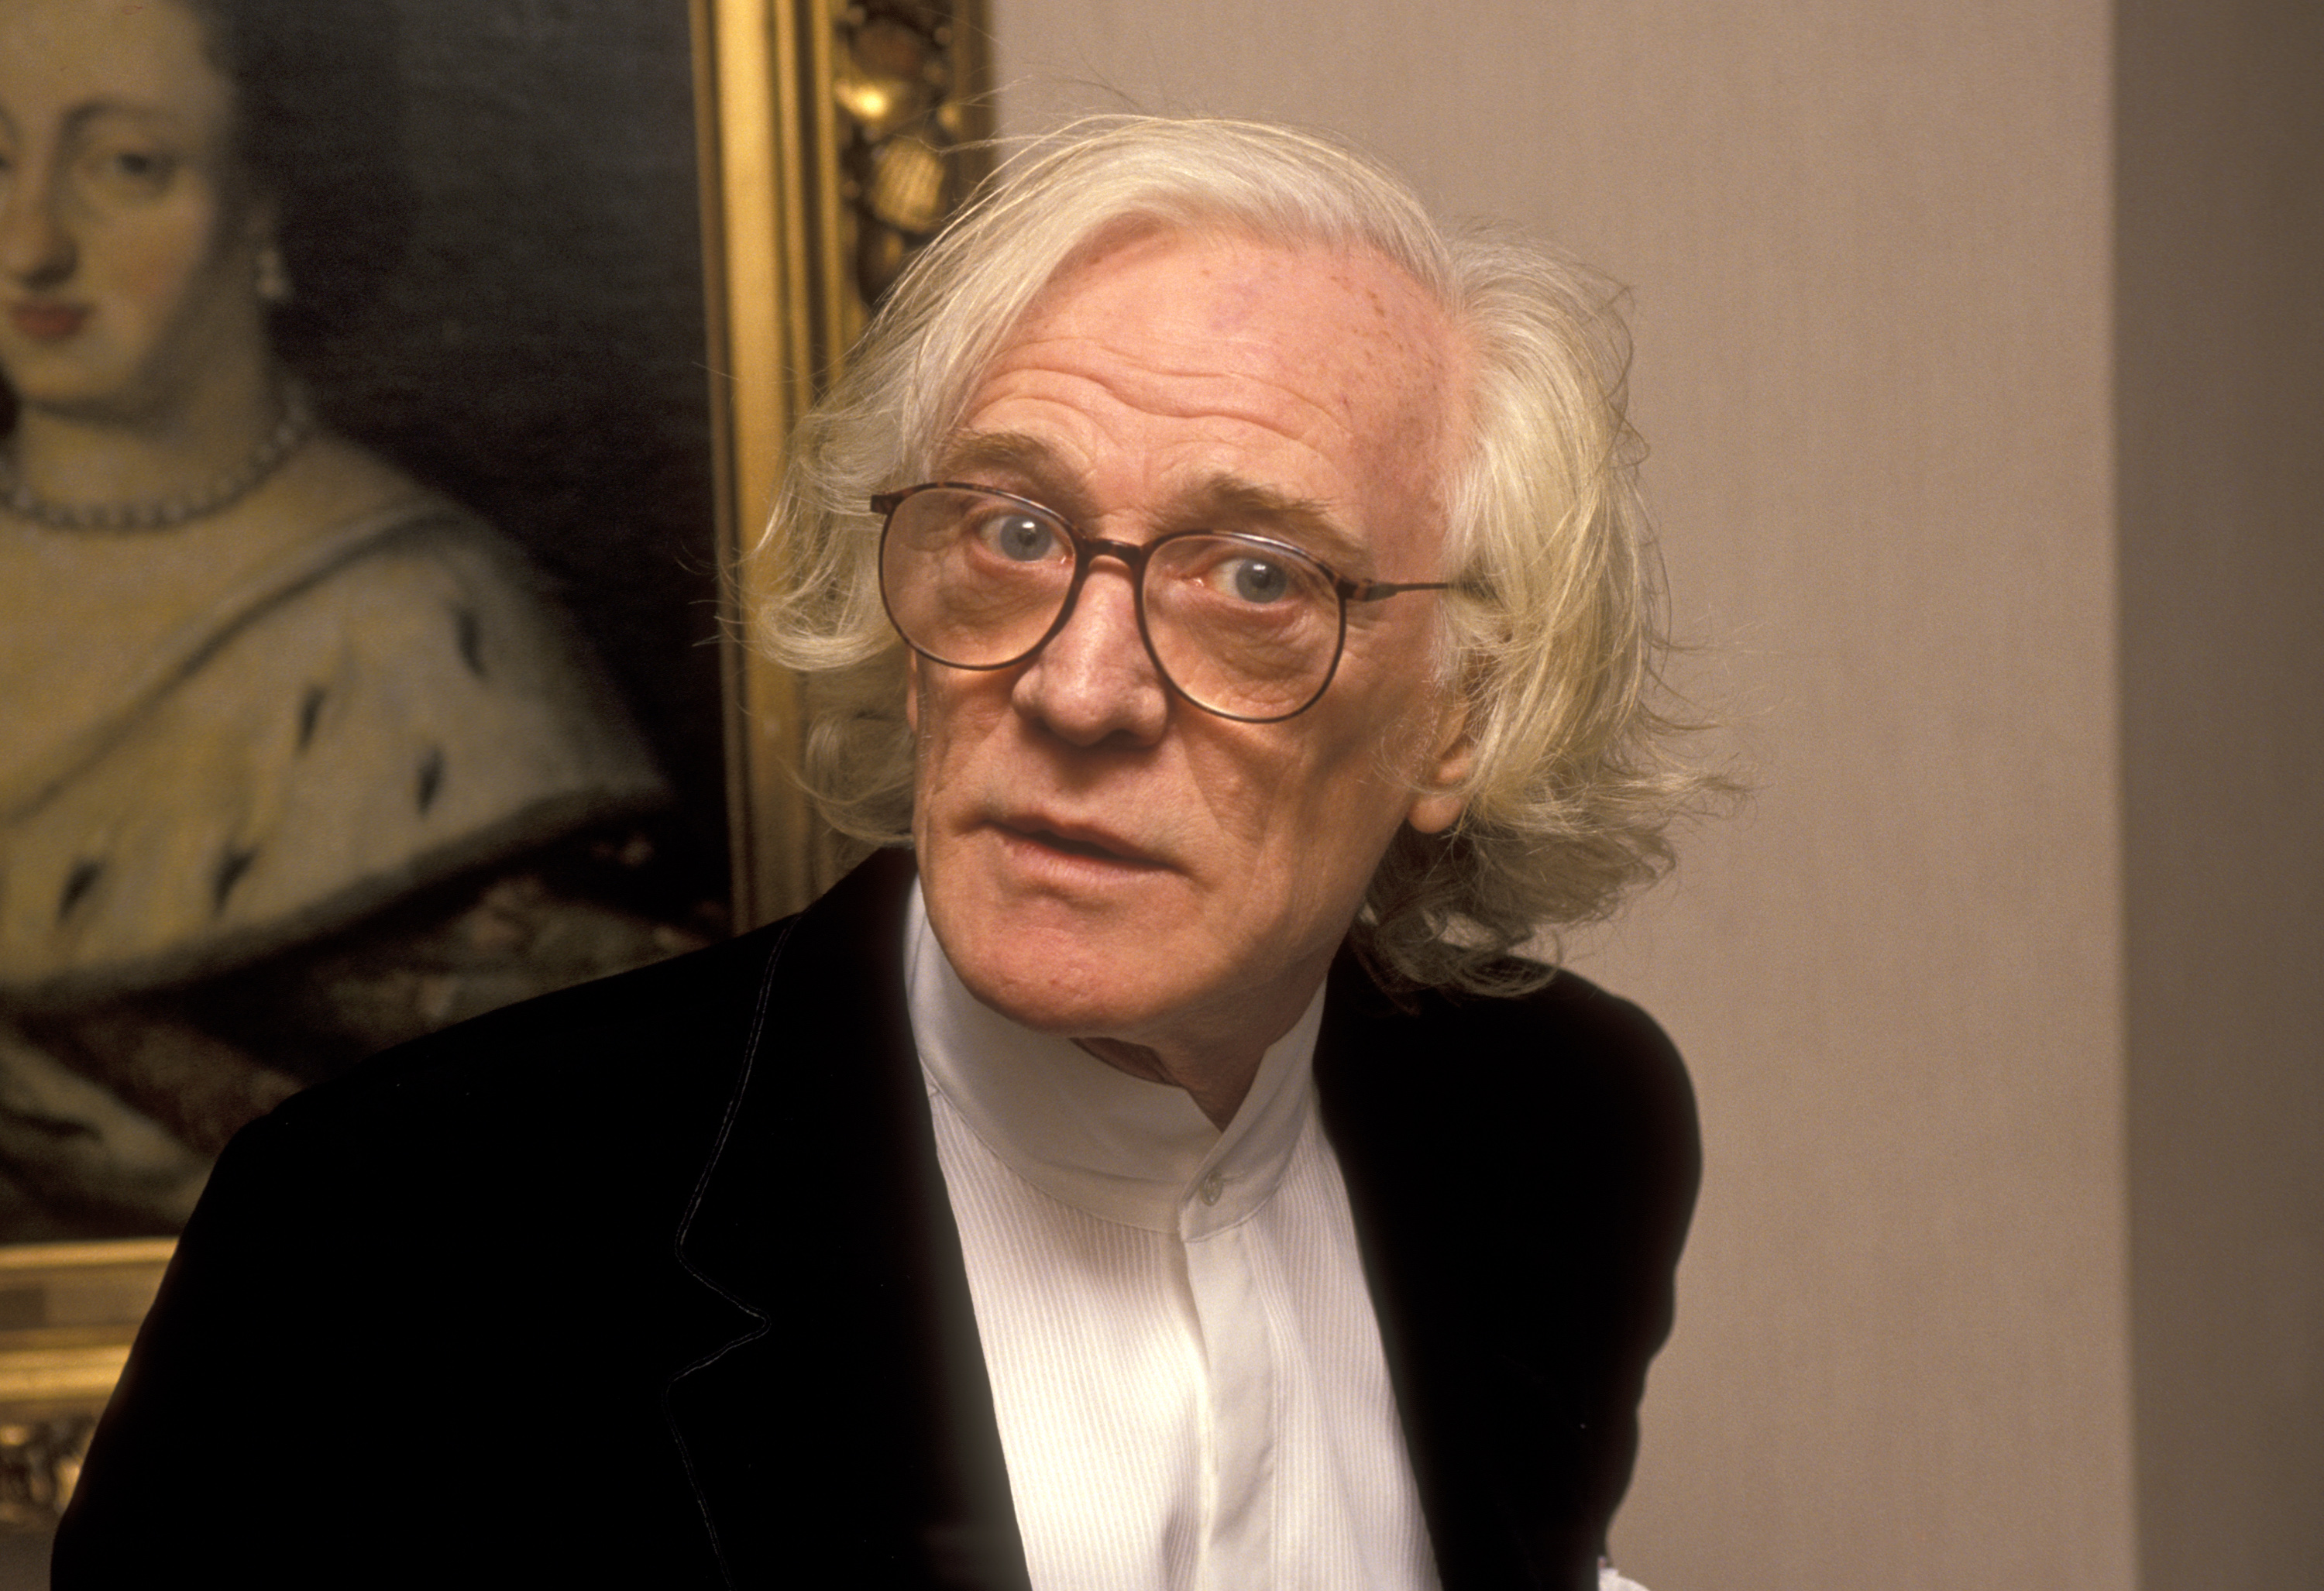 Richard Harris at the Third Annual BAFTA/LA Britannia Awards on March 17, 1991, in West Hollywood | Source: Getty Images